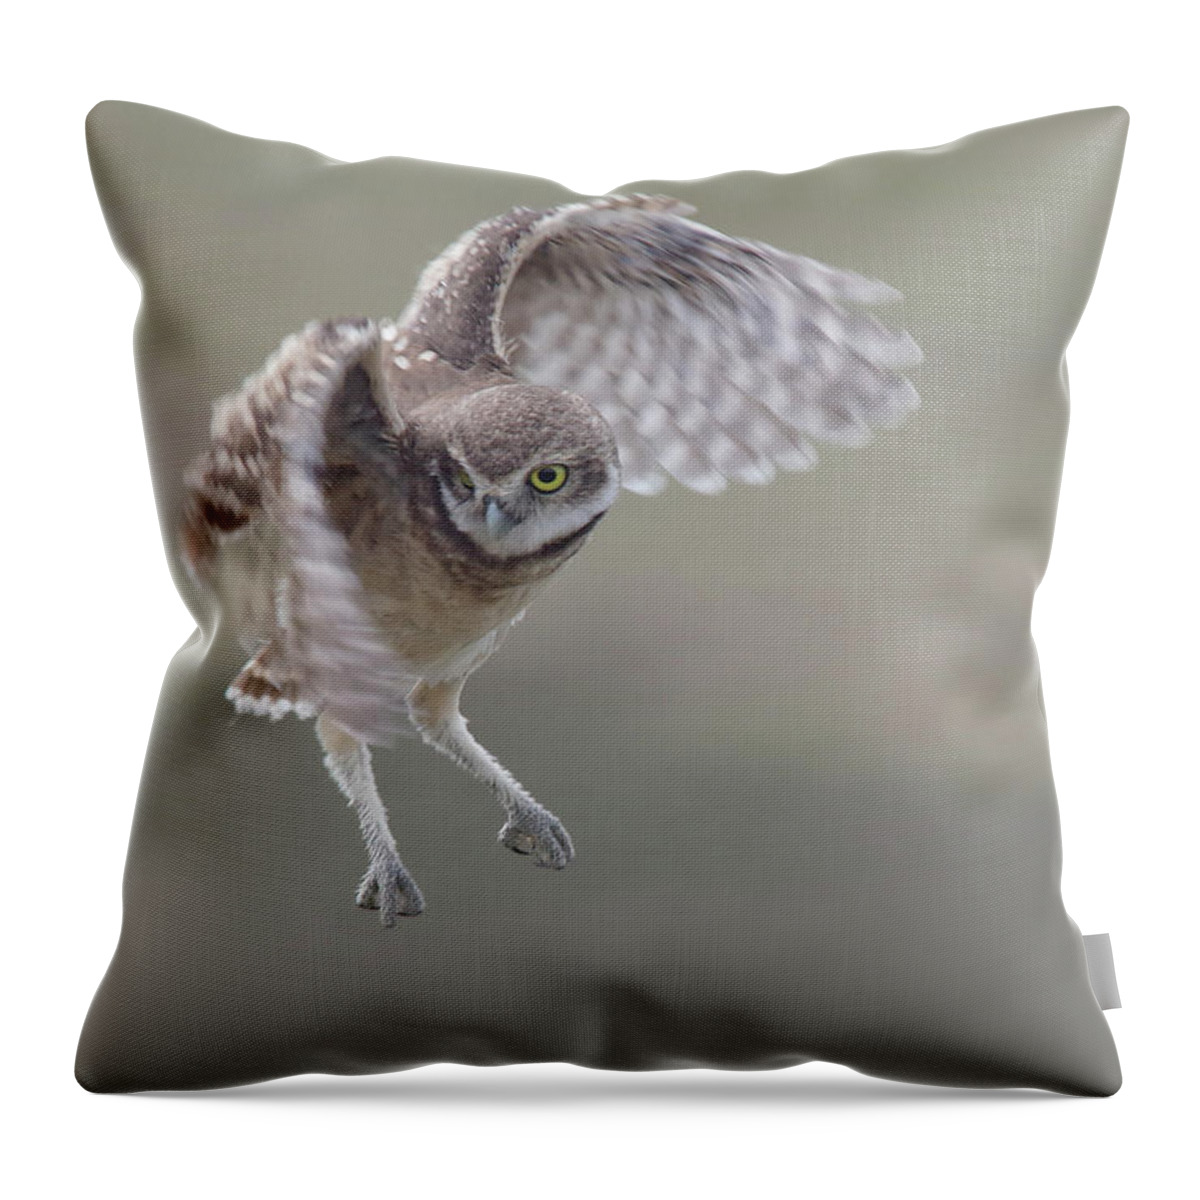 Burrowing Owlet Throw Pillow featuring the photograph Watch Me Now. by Evelyn Garcia